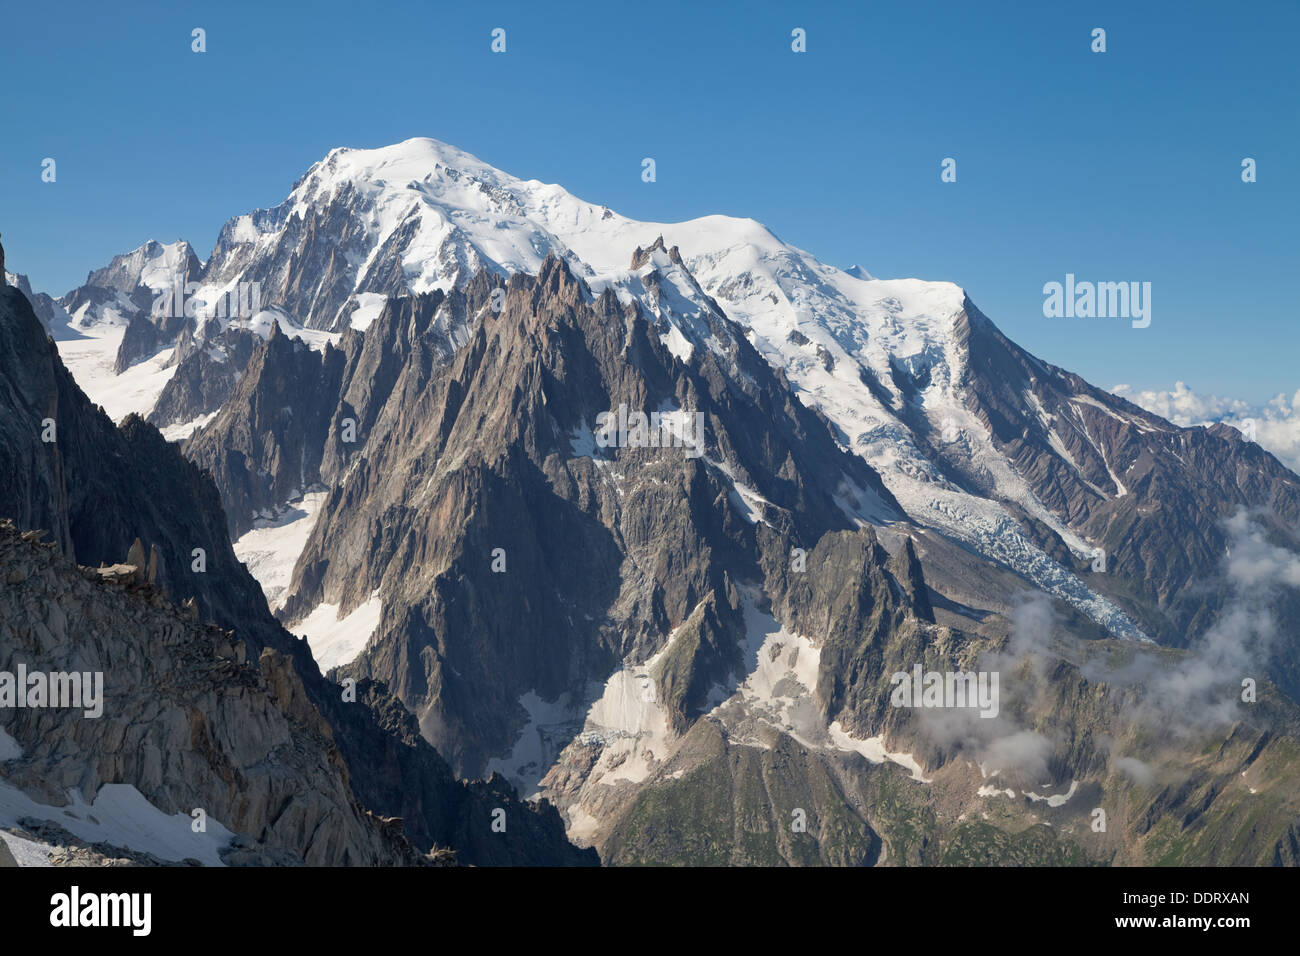 Mont Blanc massif from Grands Montets, Argentiere, France. Stock Photo